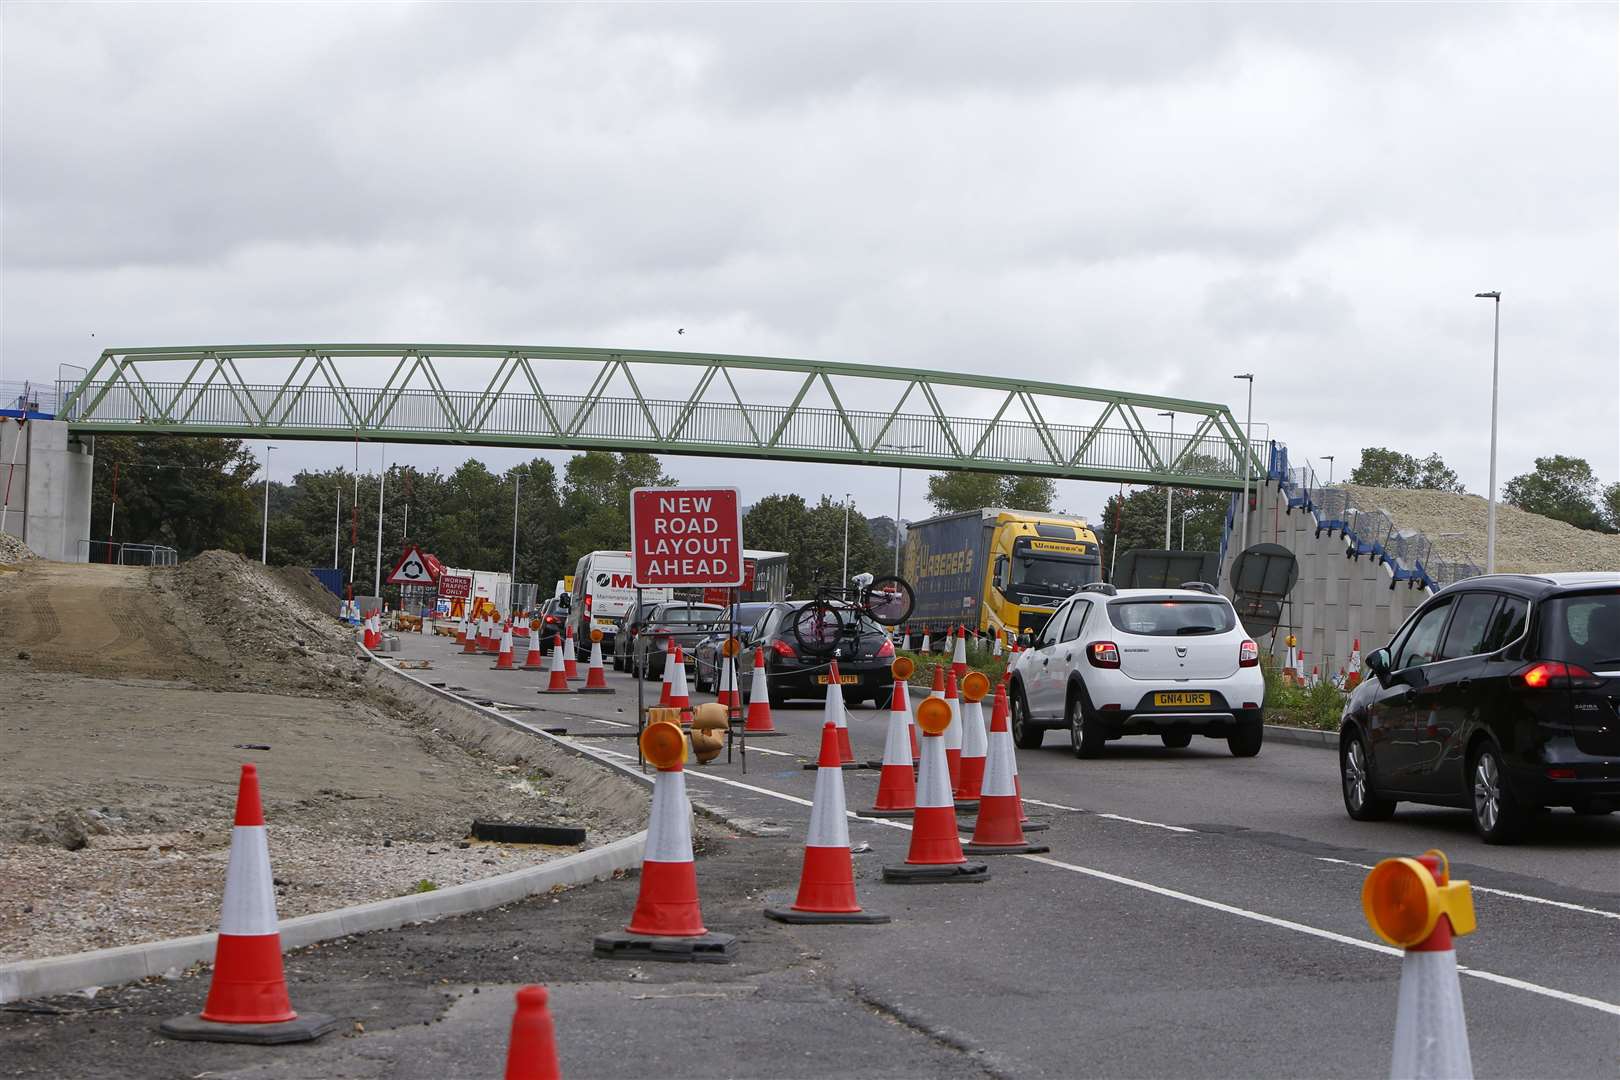 Cones will be removed in a bid to ease congestion. Picture: Andy Jones